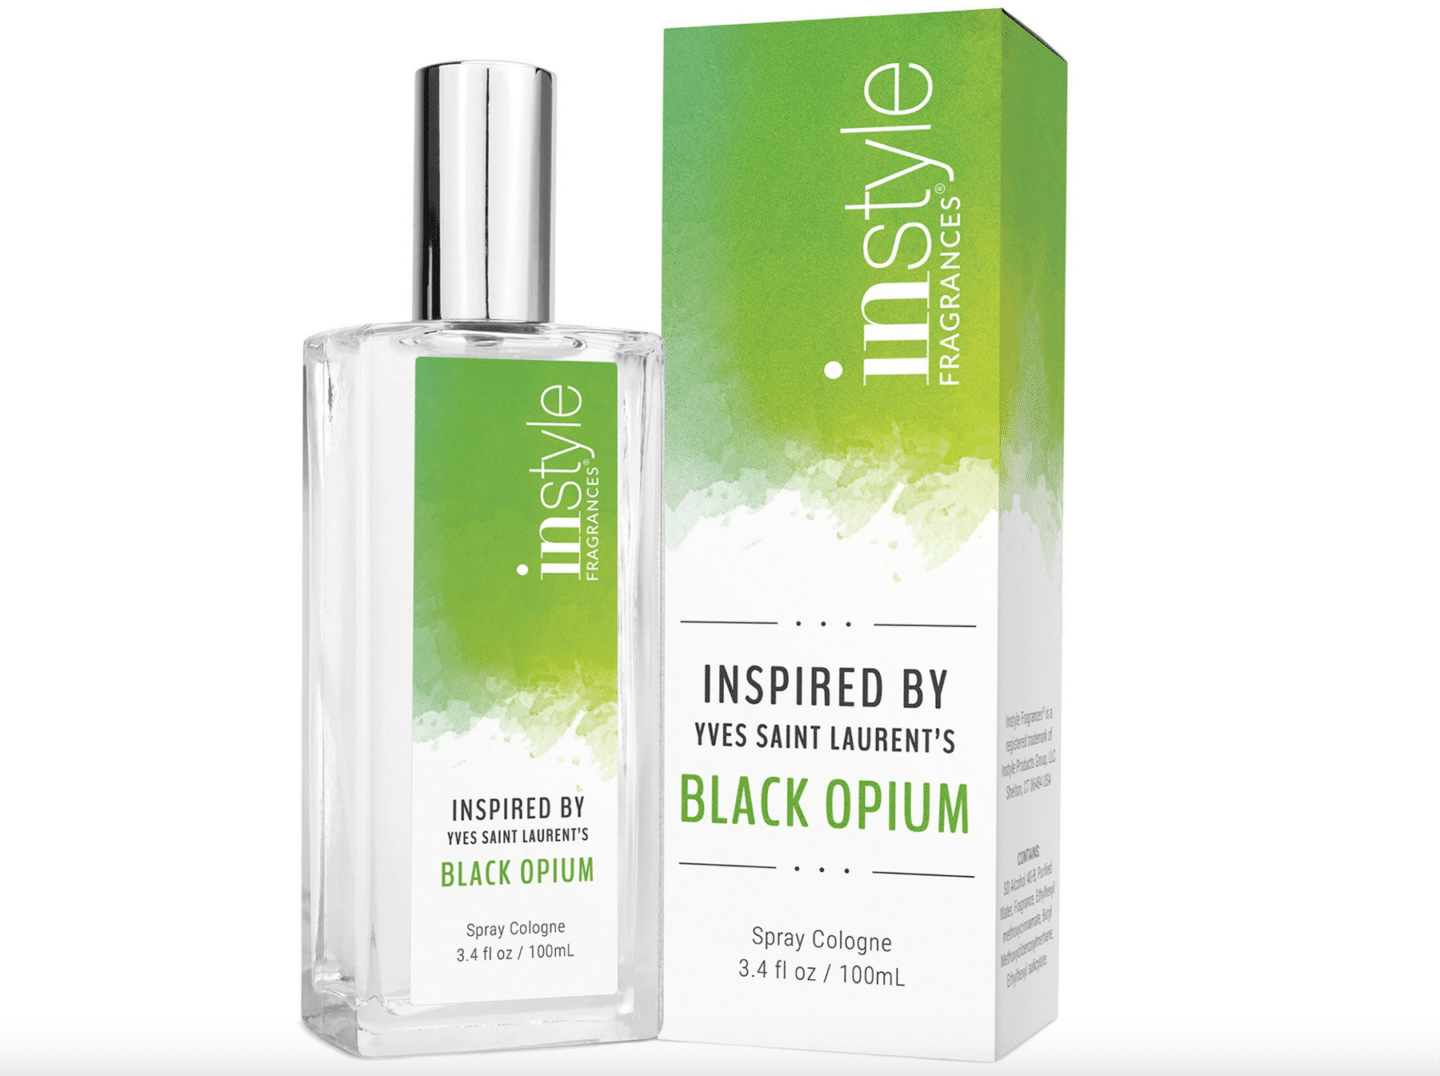 Spot-on Black Opium dupes, by beauty blogger What The Fab